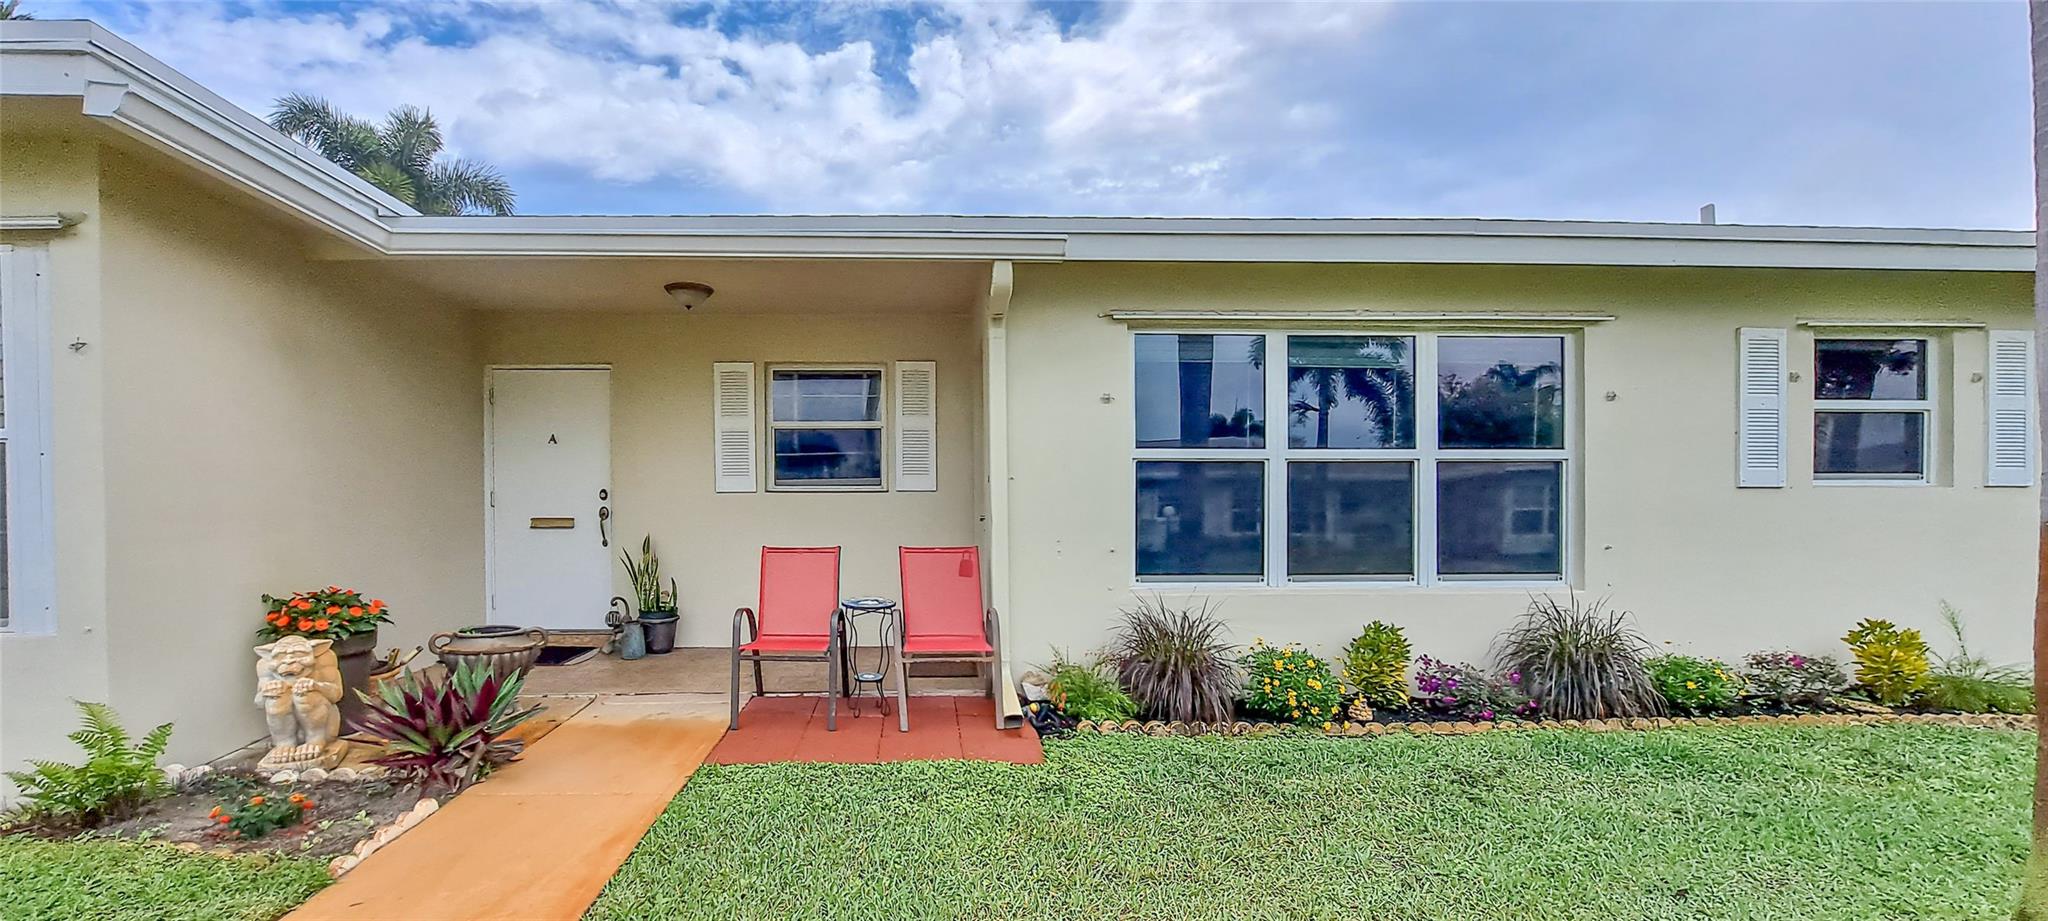 Florida living for a great price. Close to beach (less than 5 miles to Ocean Front Park)! This single-story Villa has a huge master bedroom with 2 walk-in closets. New flooring throughout and both bathrooms have been remodeled (1 full and 1 half). Laundry room with free usage is just 3 steps from back door. This 55+ Villa community offers planned activities, a heated pool, library and clubhouse. Furnishings negotiable.